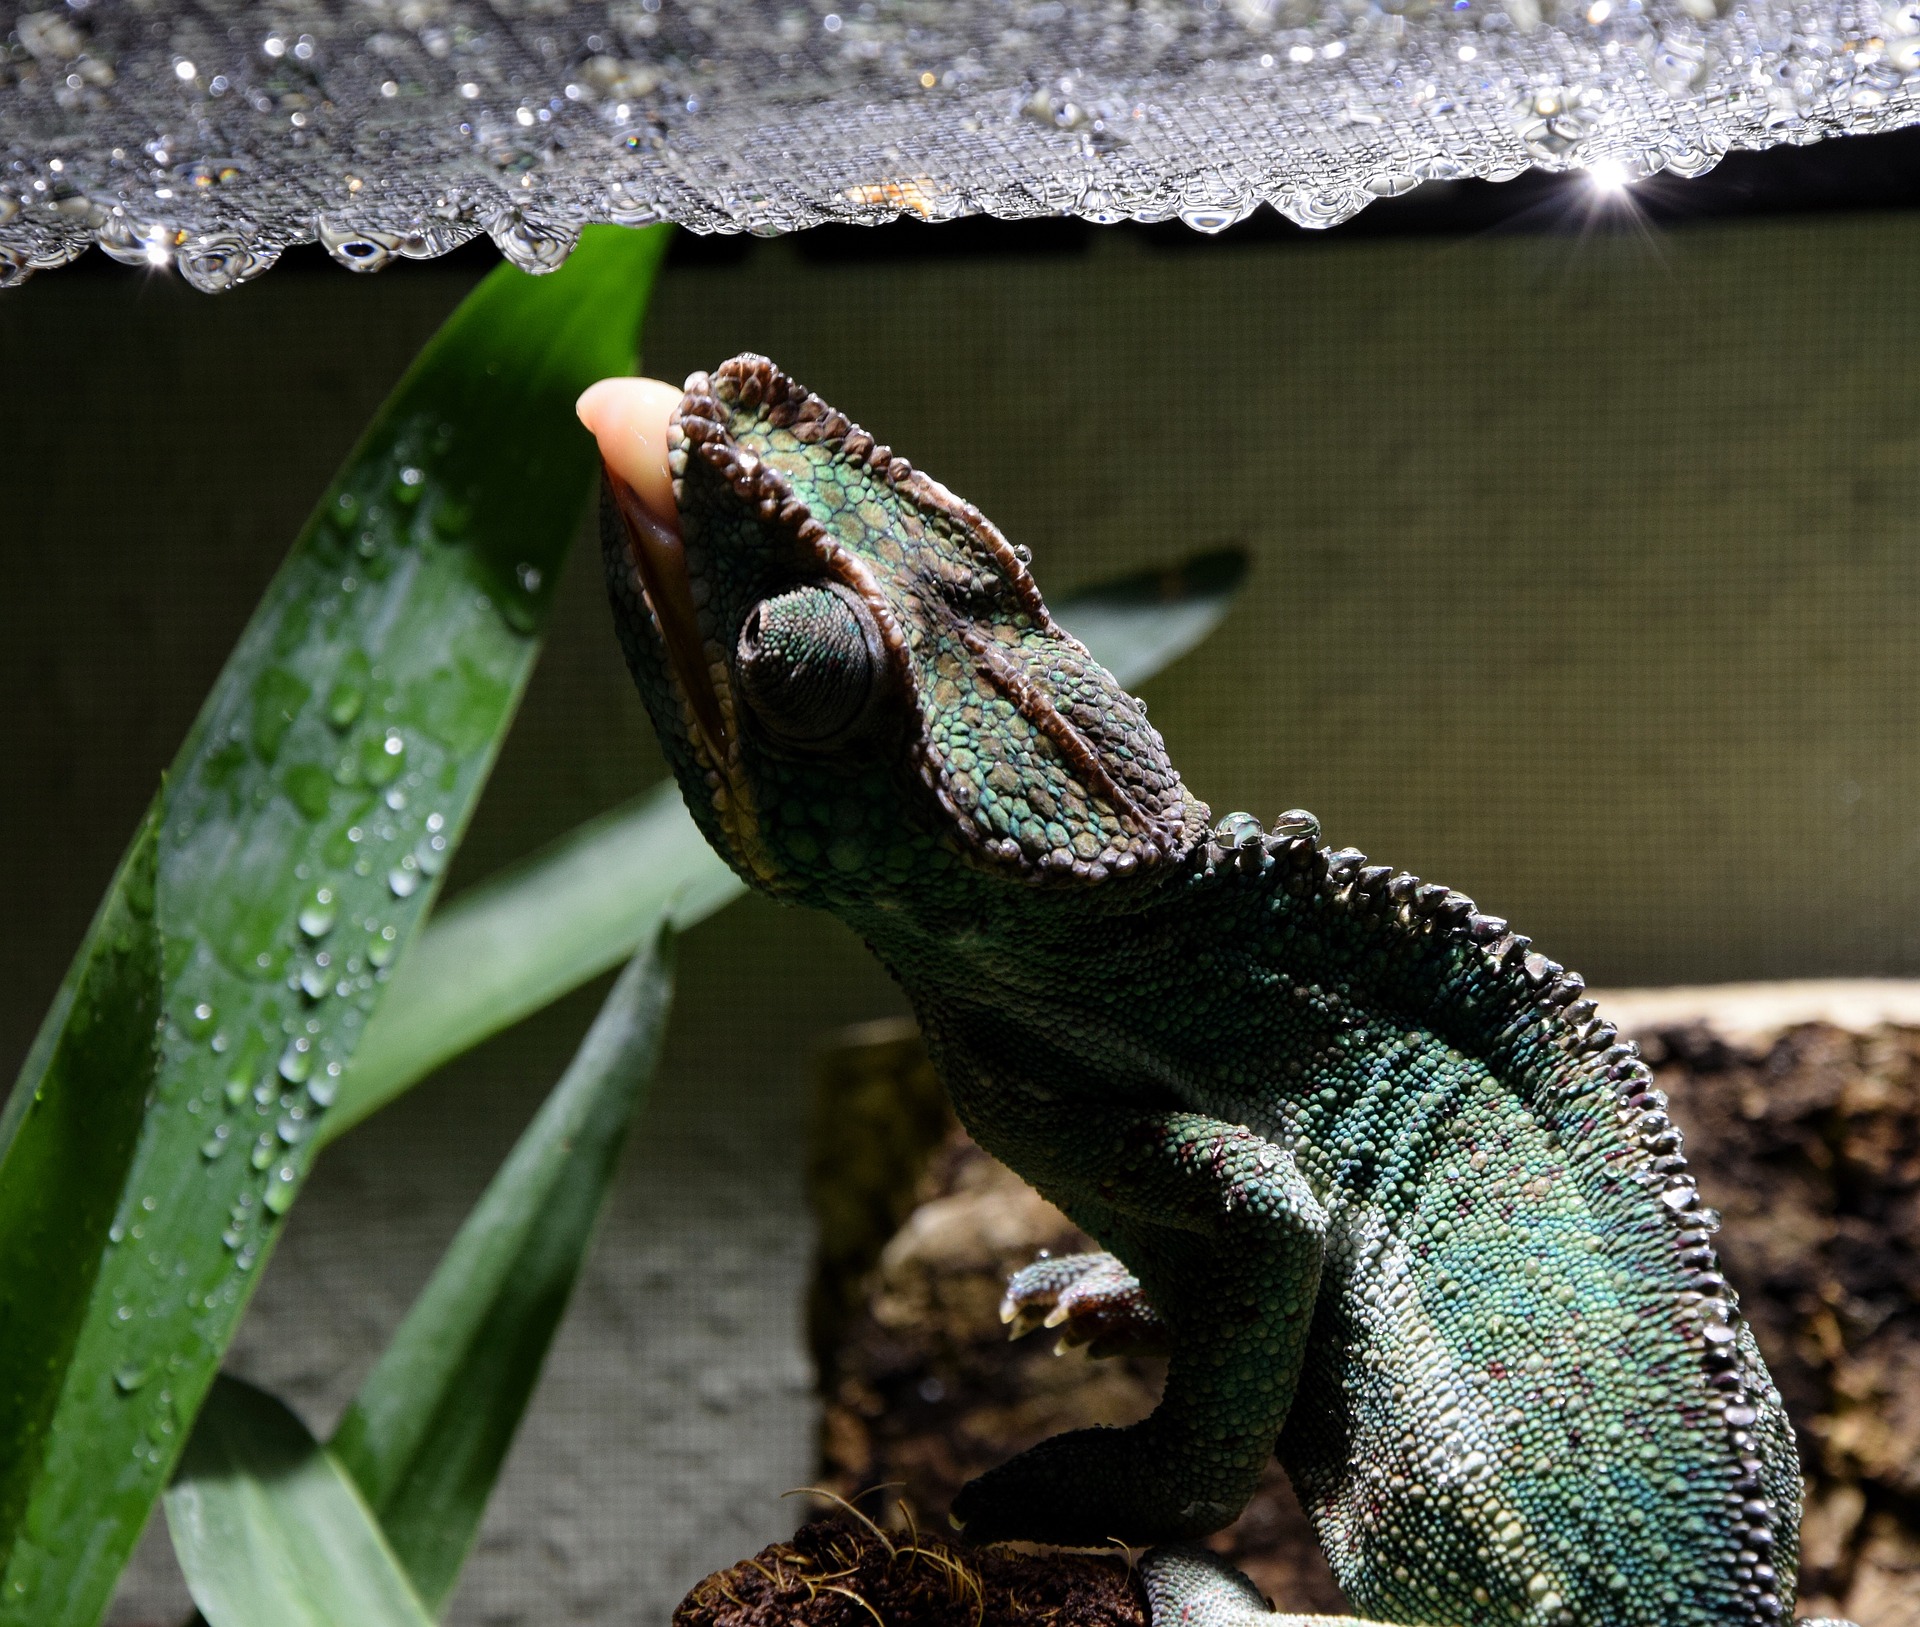 Chameleon drinking water drops